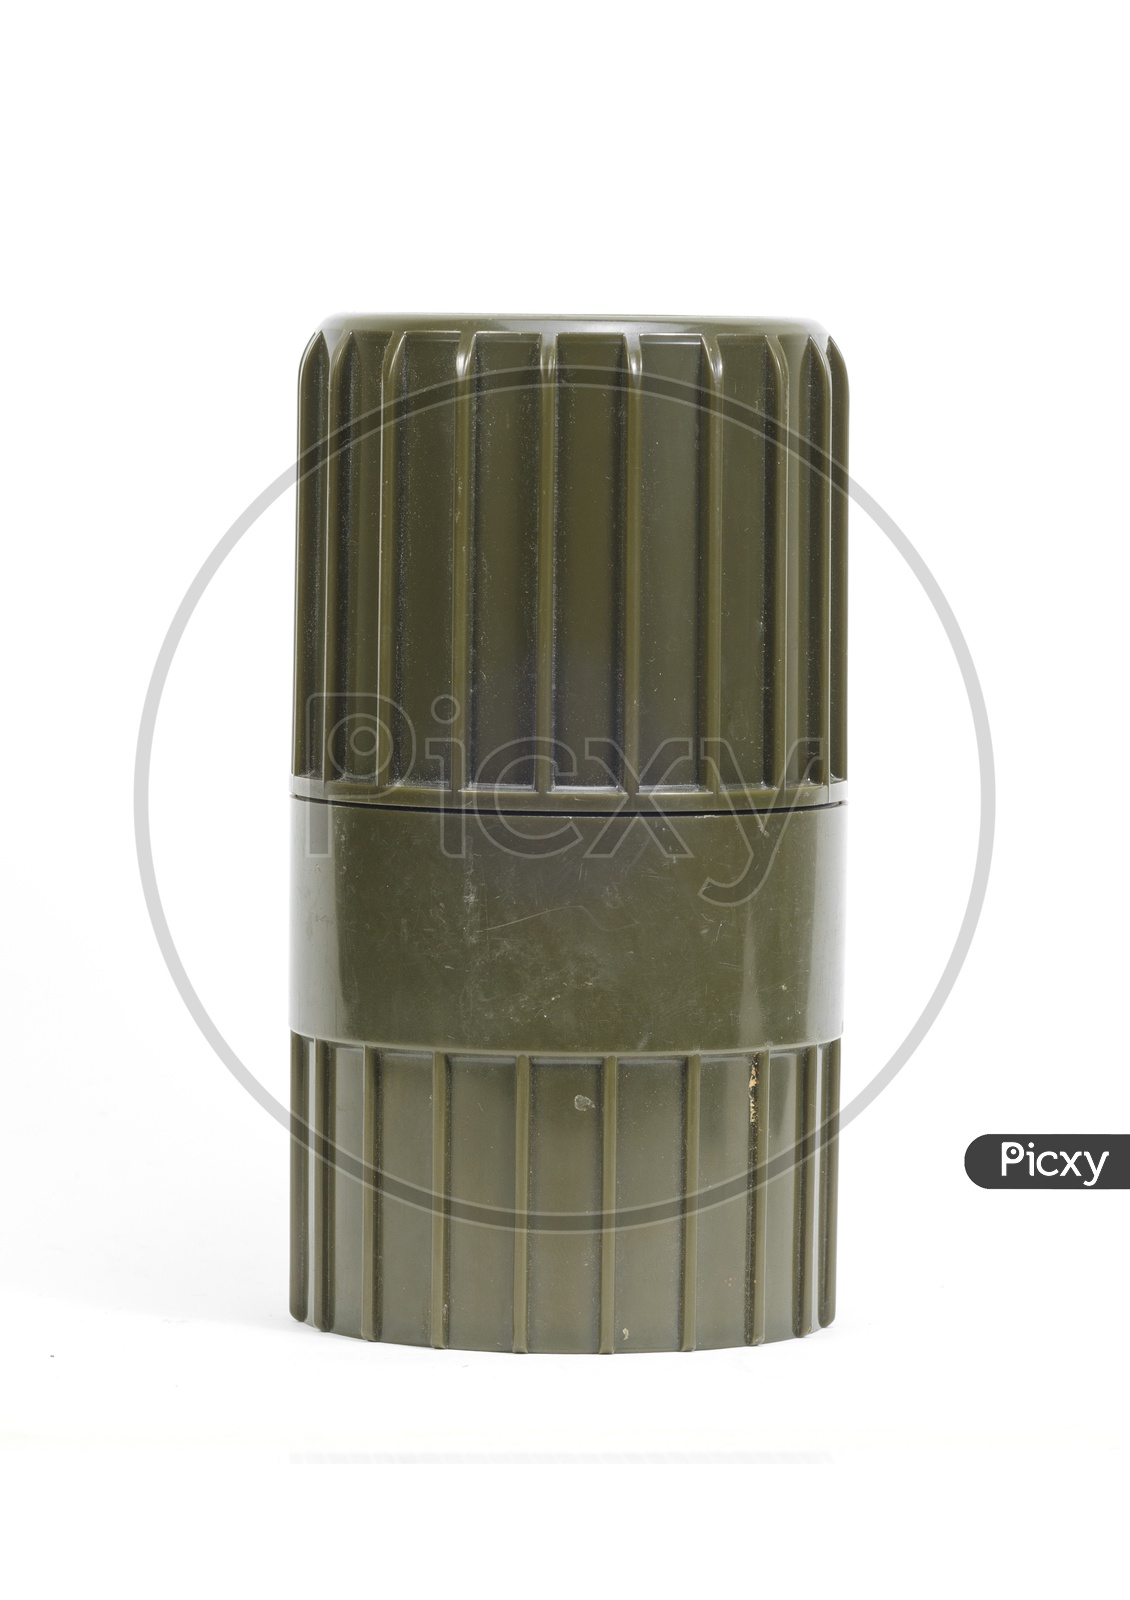 Cylindrical shape plastic container on white background